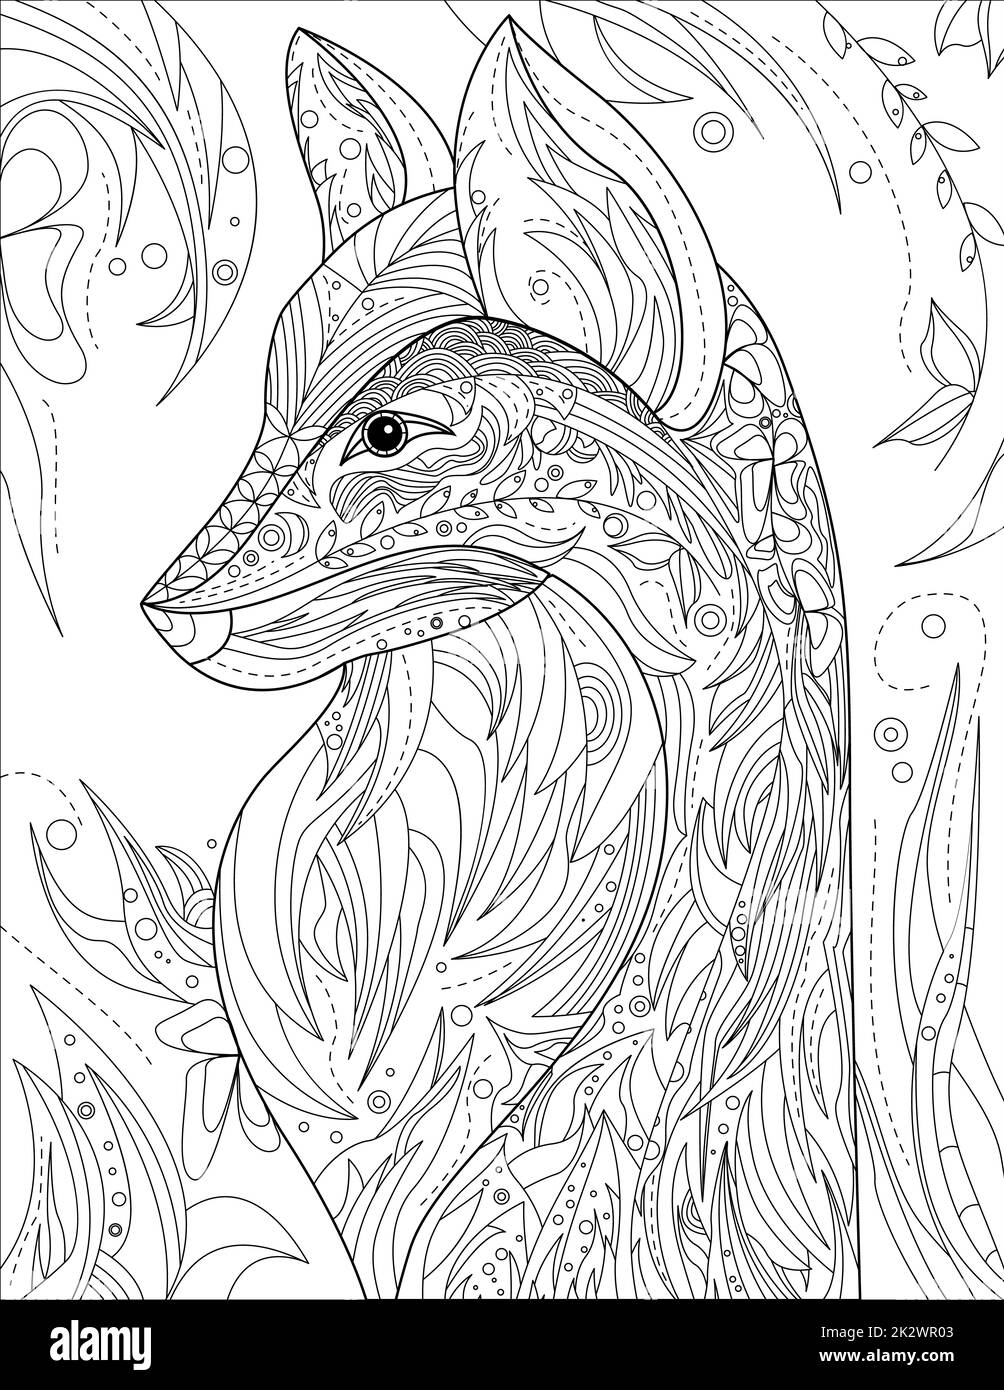 Wolf Head Line Drawing With Geometric Details Coloring Book idea Stock Photo